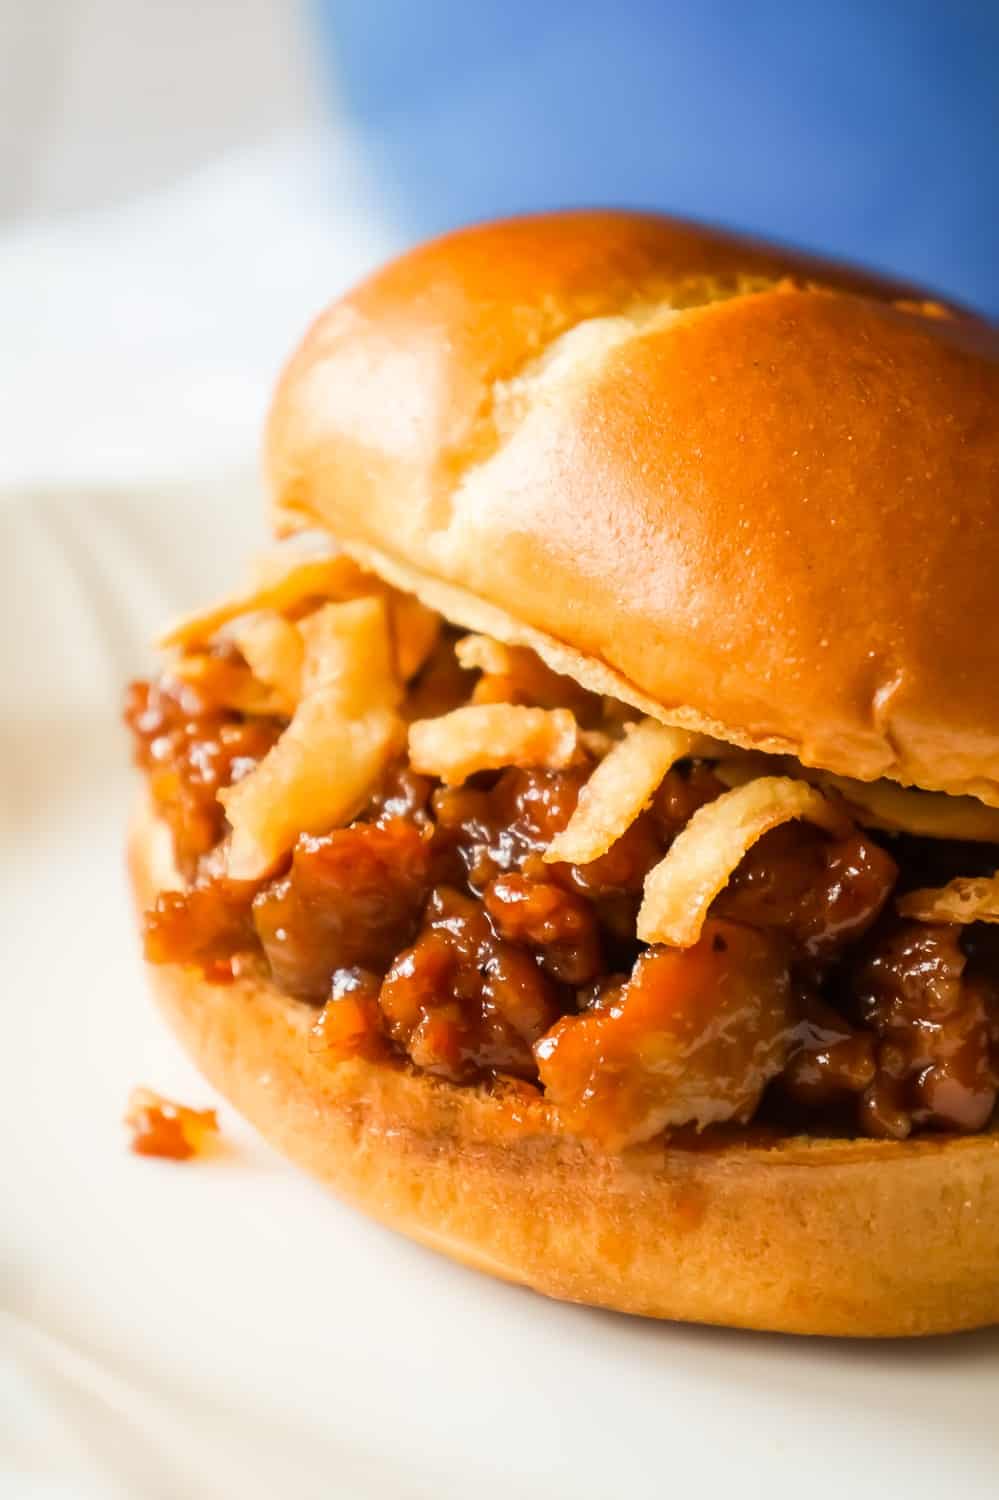 Dr Pepper Pork Sloppy Joes are an easy dinner recipe using ground pork sausage meat and diced onions cooked in Dr Pepper and BBQ sauce.